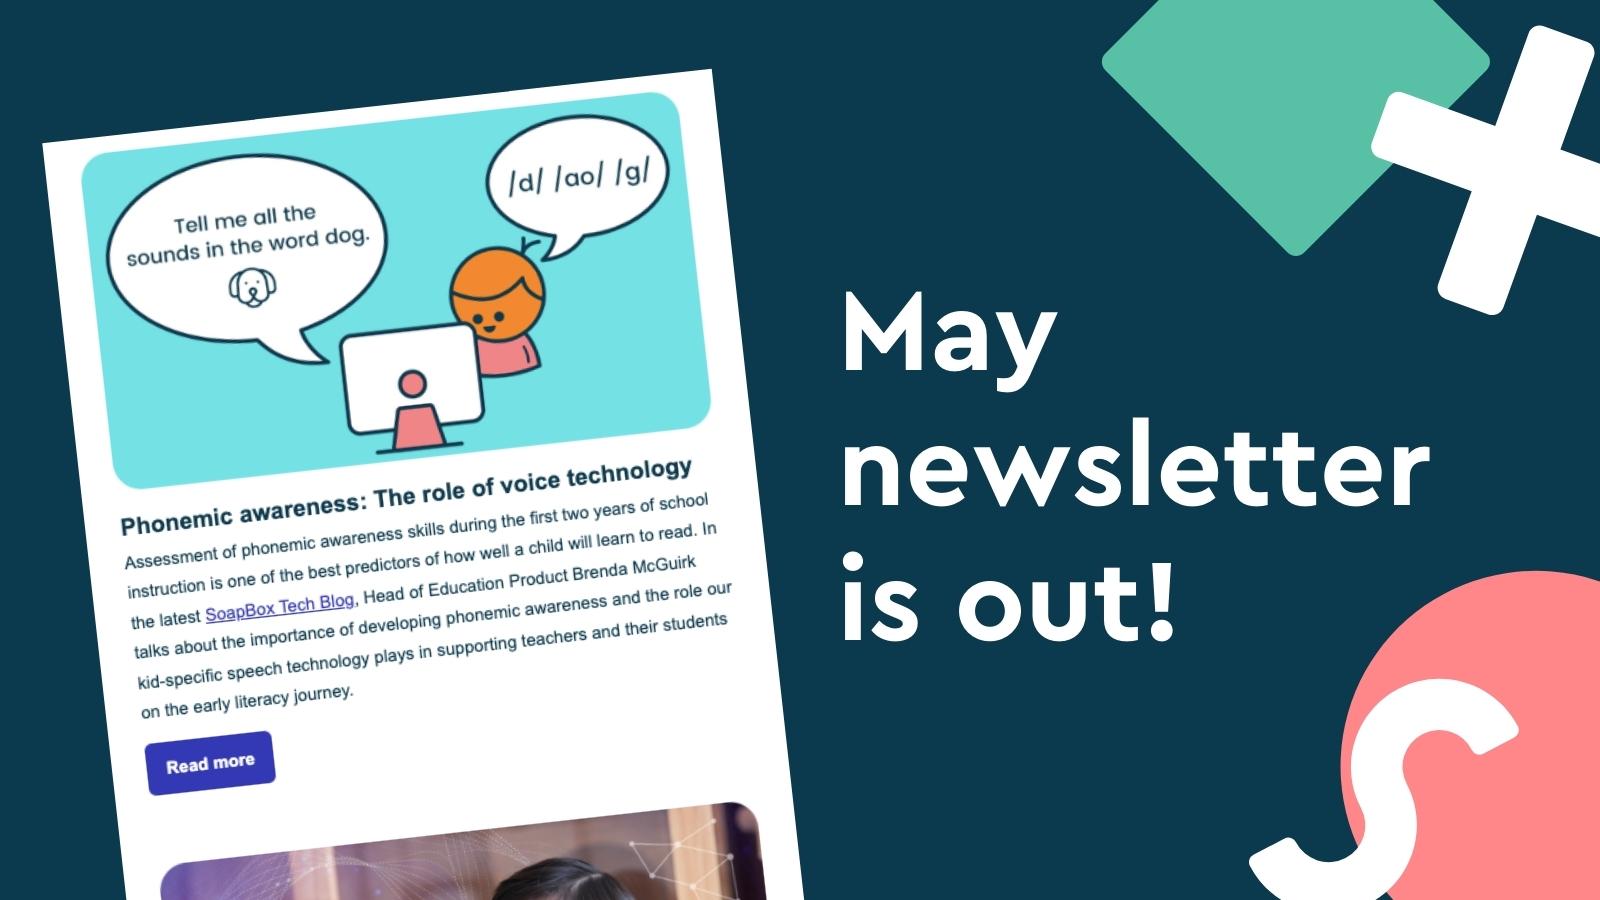 An image with text that says, "May newsletter is out!" The image also includes a screenshot of an email newsletter.